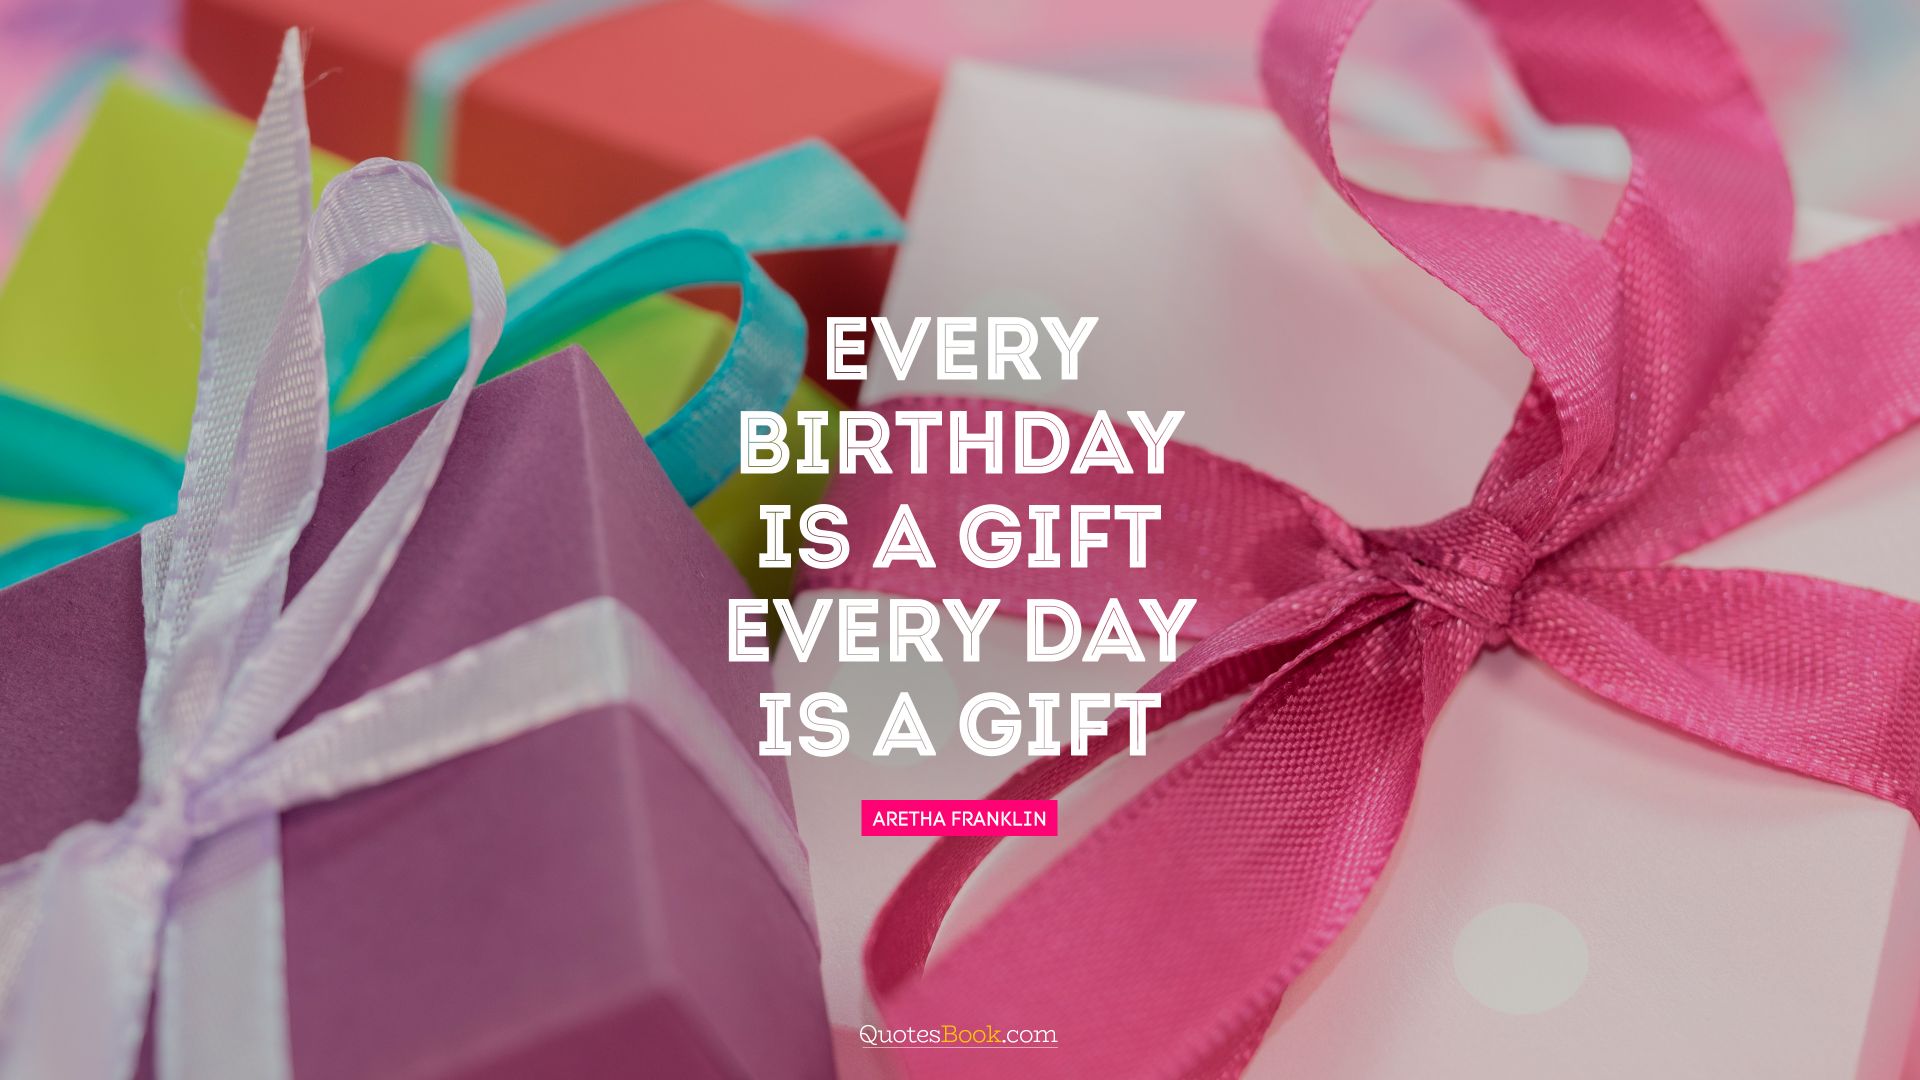 Every birthday is a gift. Every day is a gift. - Quote by Aretha Franklin